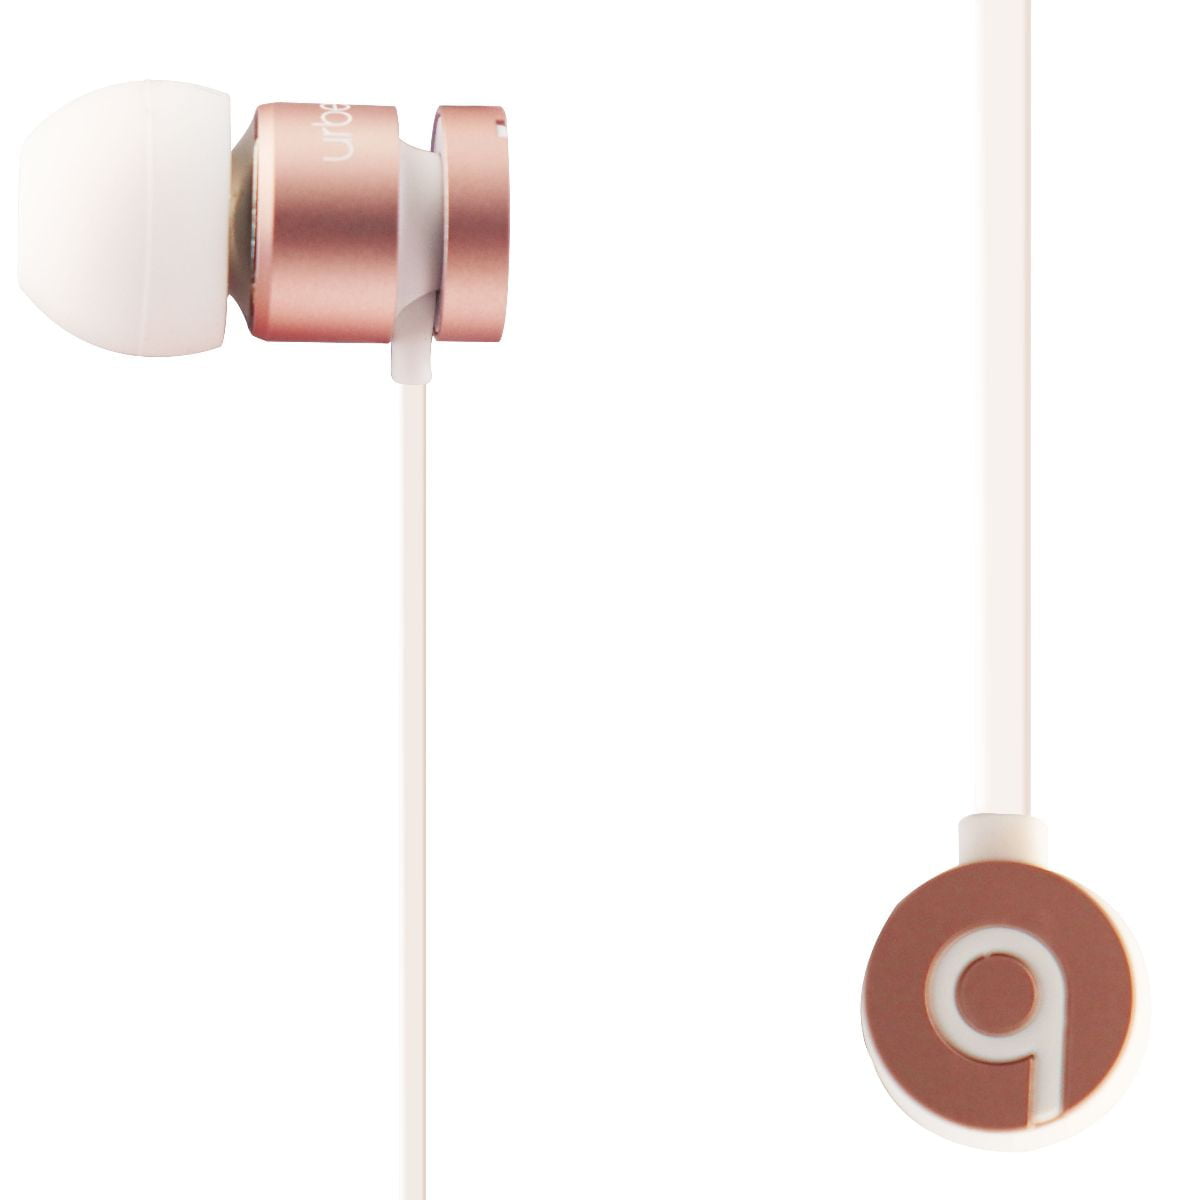 Beats urBeats 2 Series Wired In-Ear 